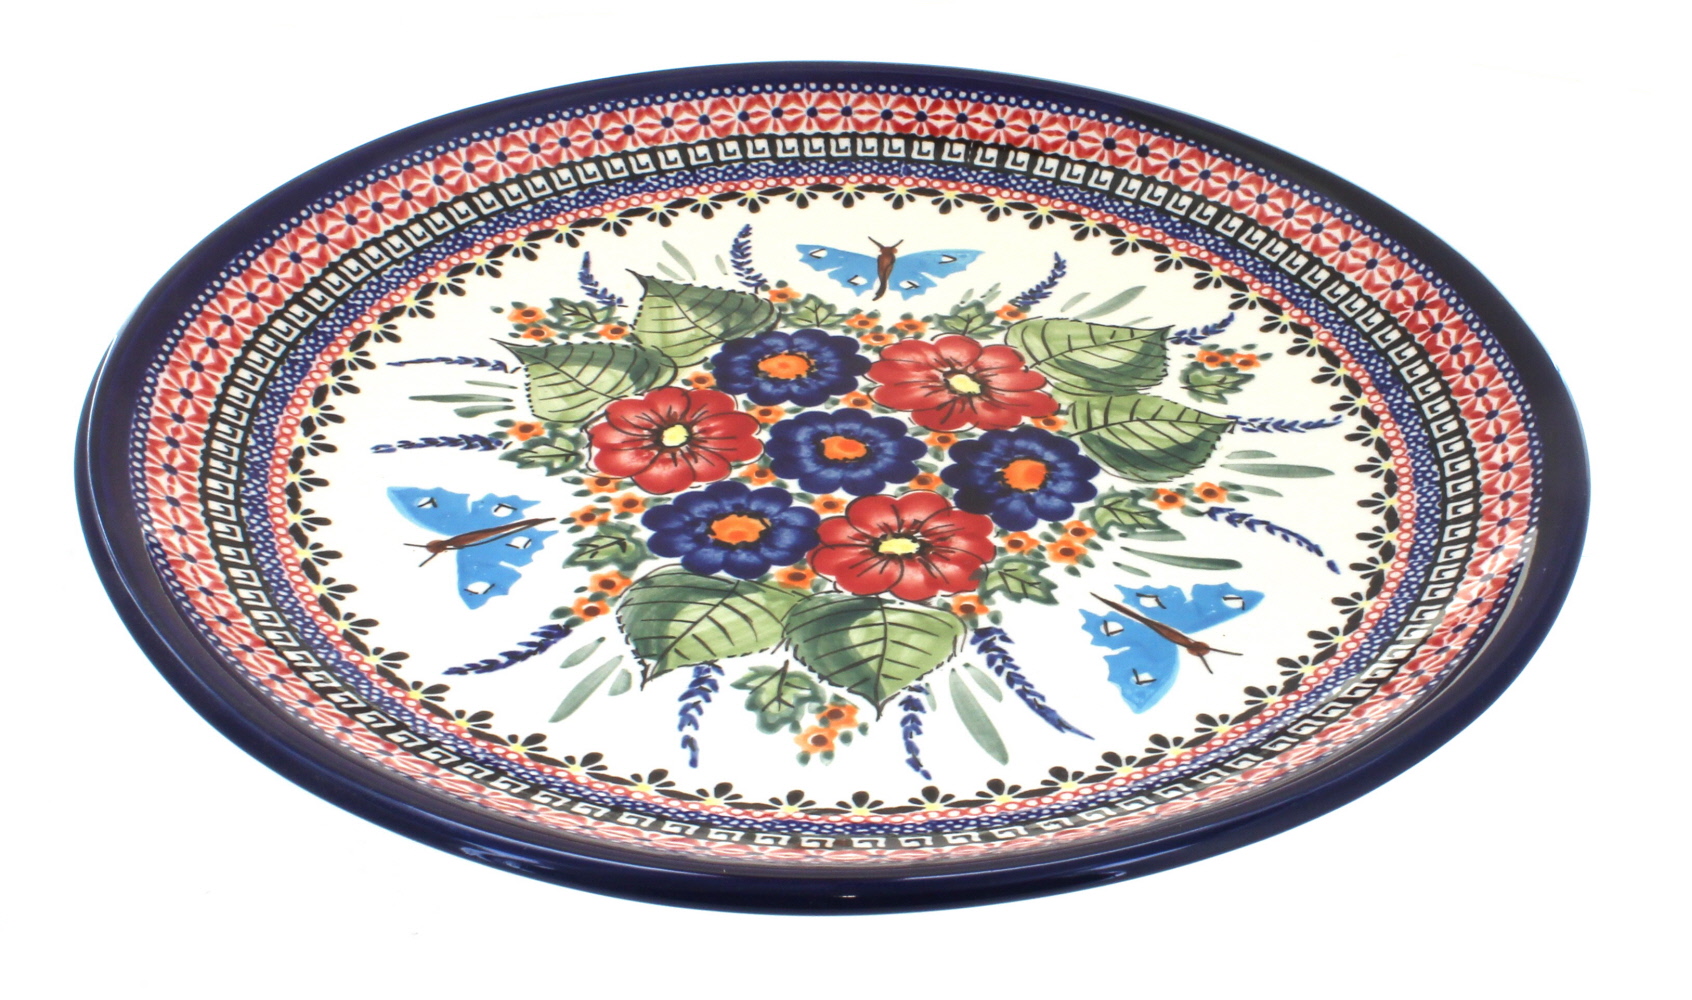 Floral Butterfly Large Round Platter - Blue Rose Polish Pottery